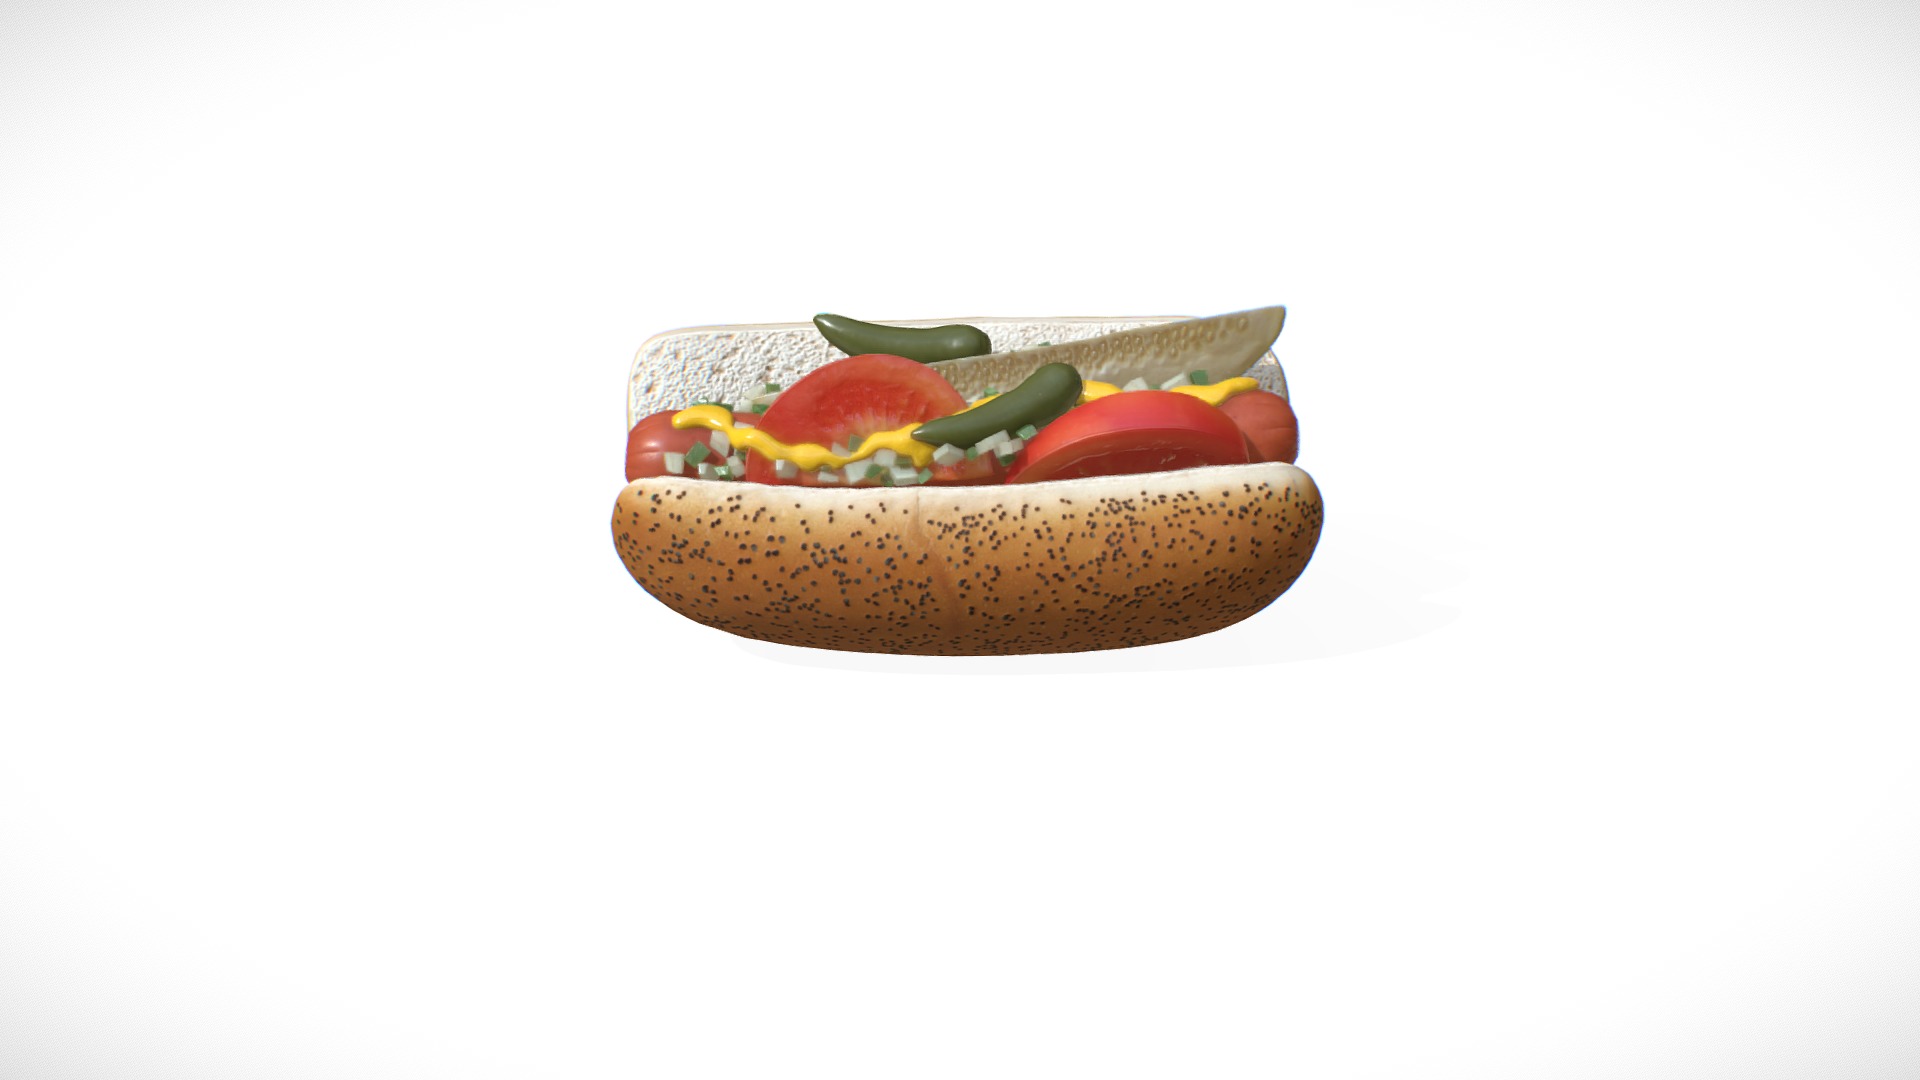 3D model Food Series #3 – Hot Dog - This is a 3D model of the Food Series #3 - Hot Dog. The 3D model is about a bowl of food.